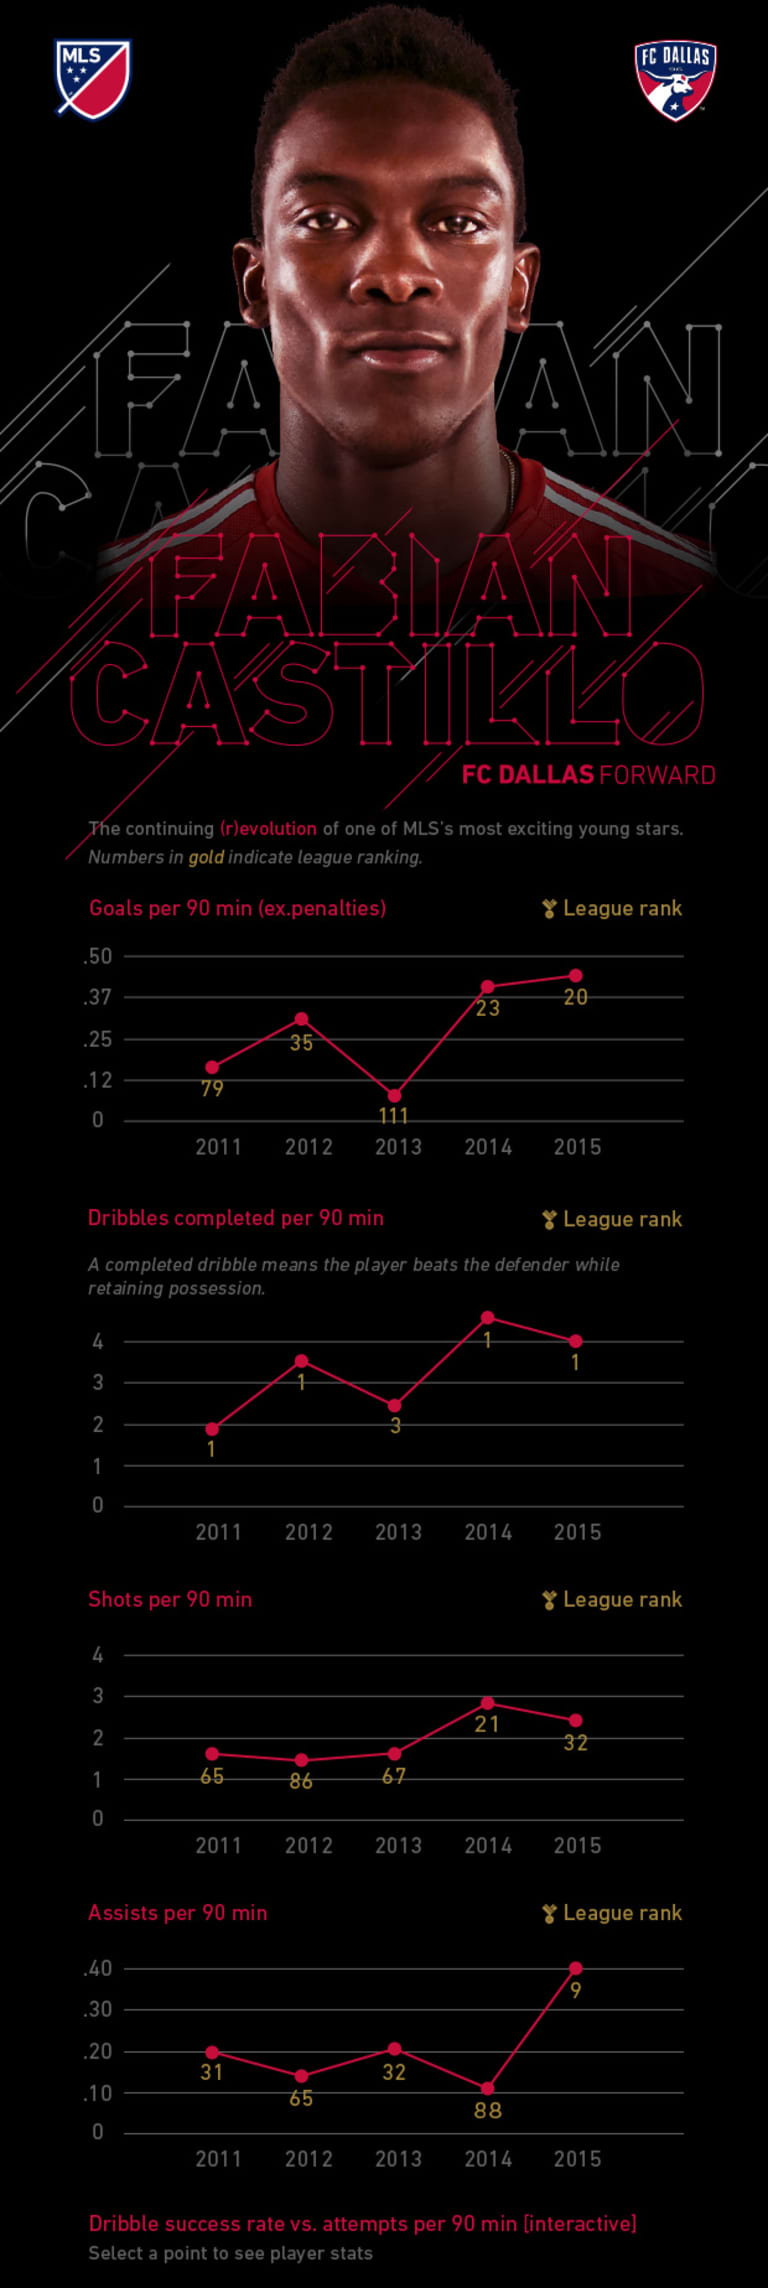 FC Dallas attacker Fabian Castillo sheds “potential" label, shows he’s the real deal | INFOGRAPHIC -